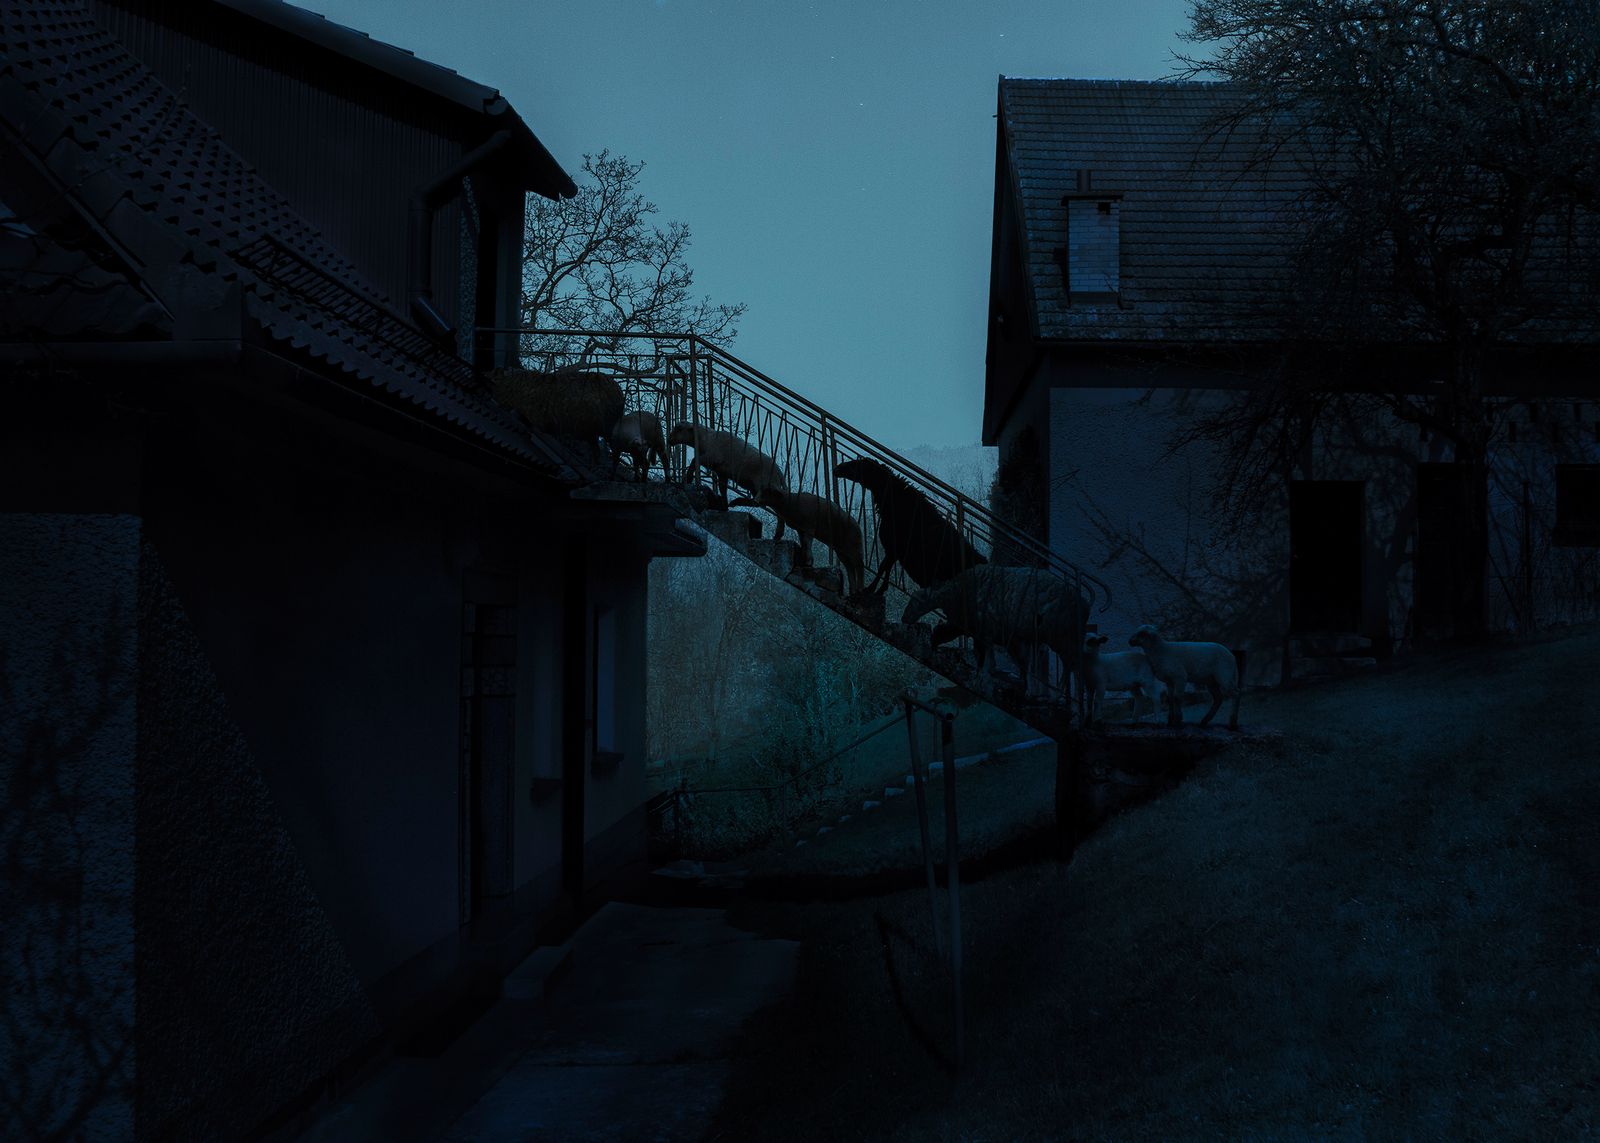 © Adam Żądło - Image from the Deserted village photography project